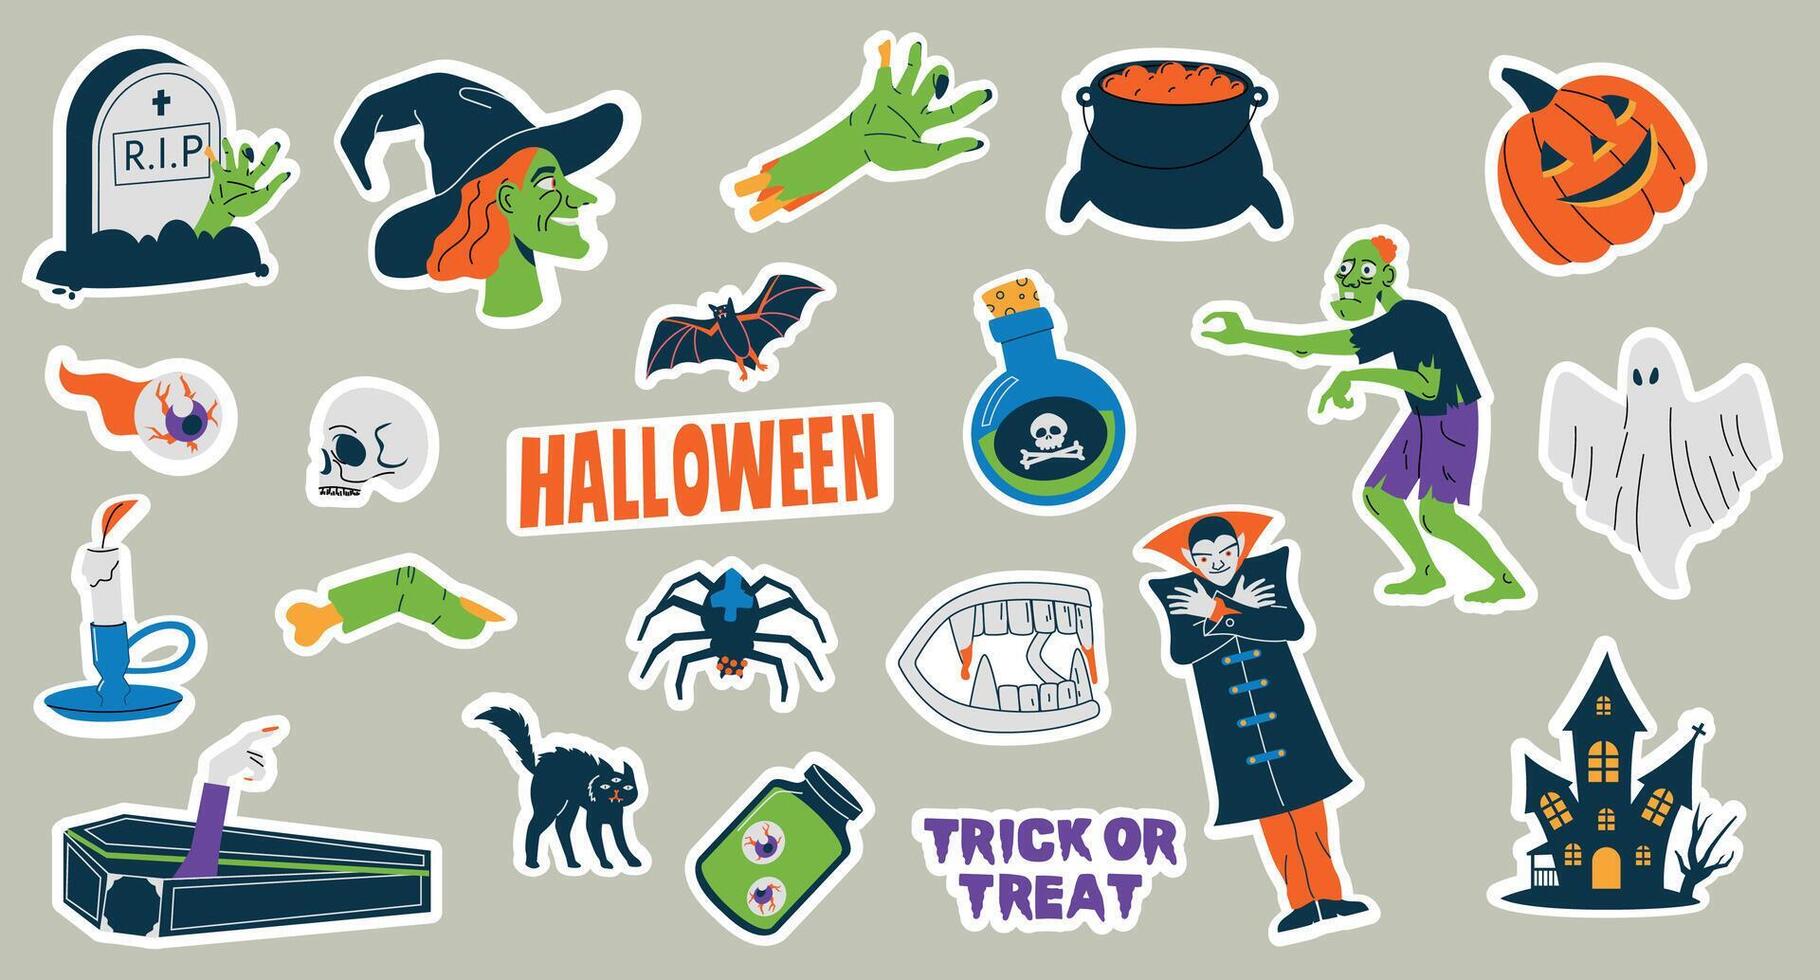 Halloween stickers. Cute cartoon scary traditional characters, trick or treats holiday decoration collection flat style, autumn celebration badges. Vector seasonal set